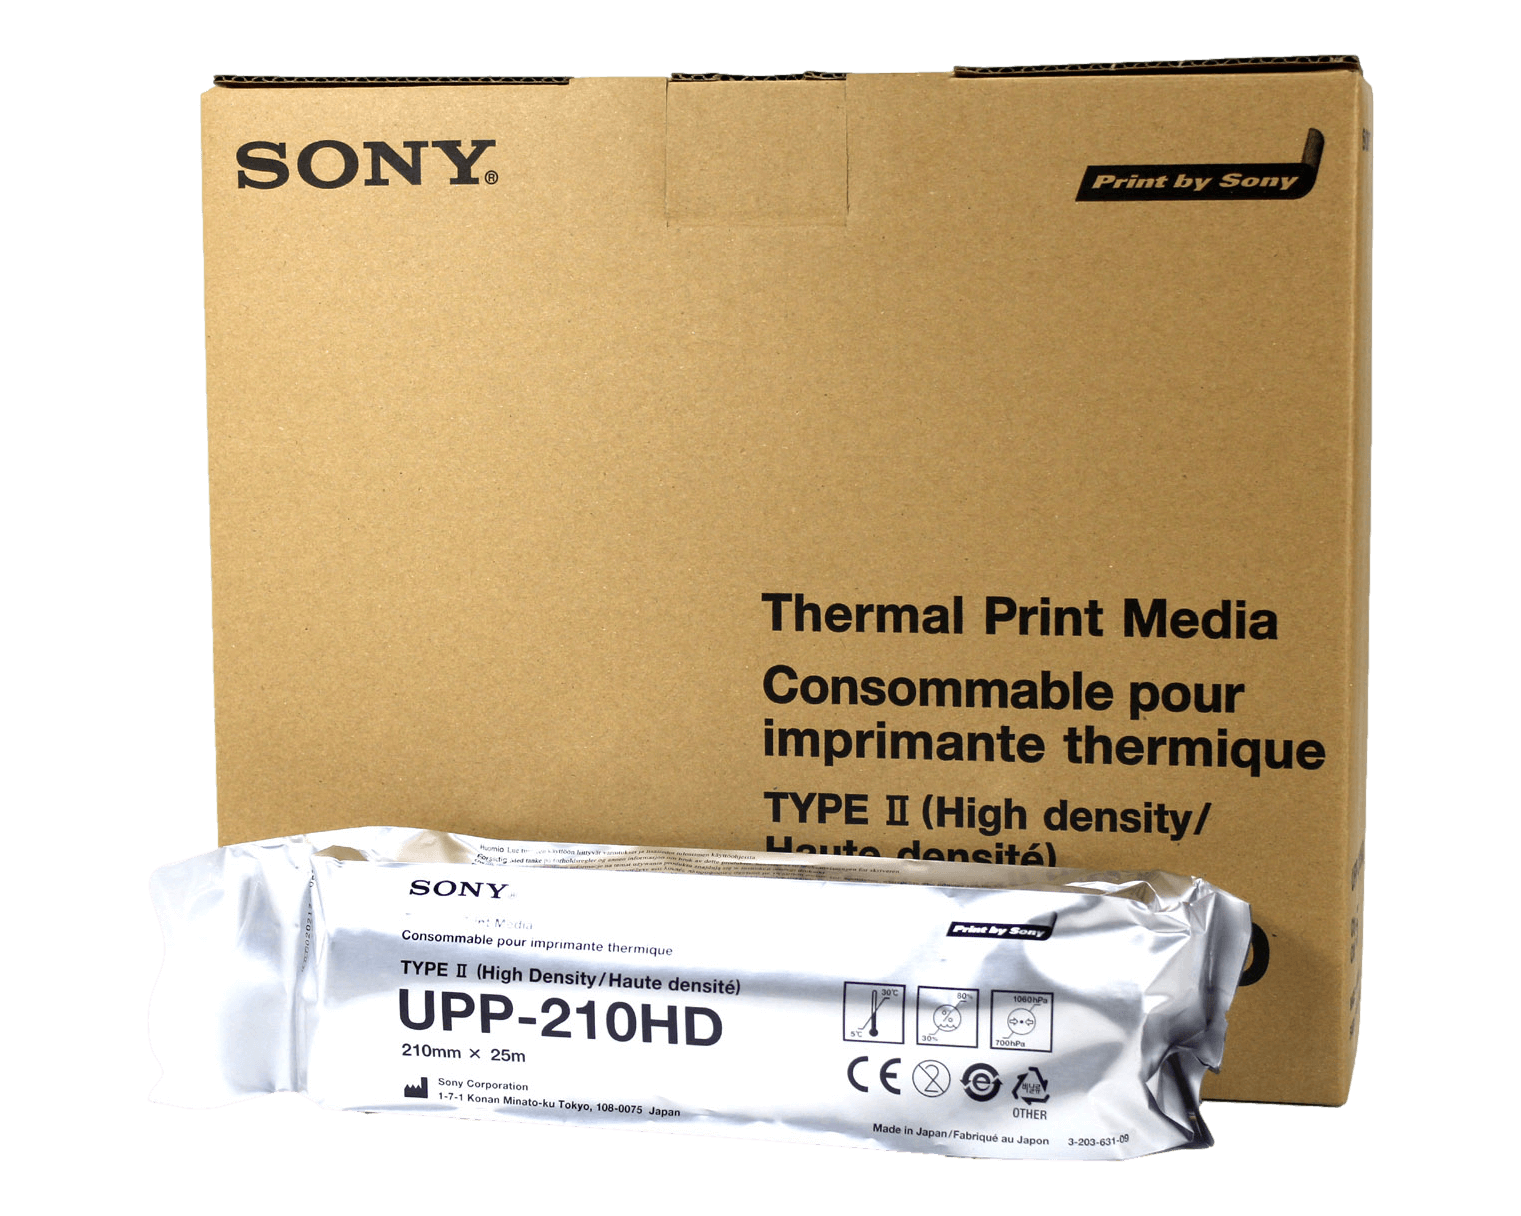 Sony UPP-210HD high density thermal paper compatible with Sony printers - Type II - 5 rolls per box